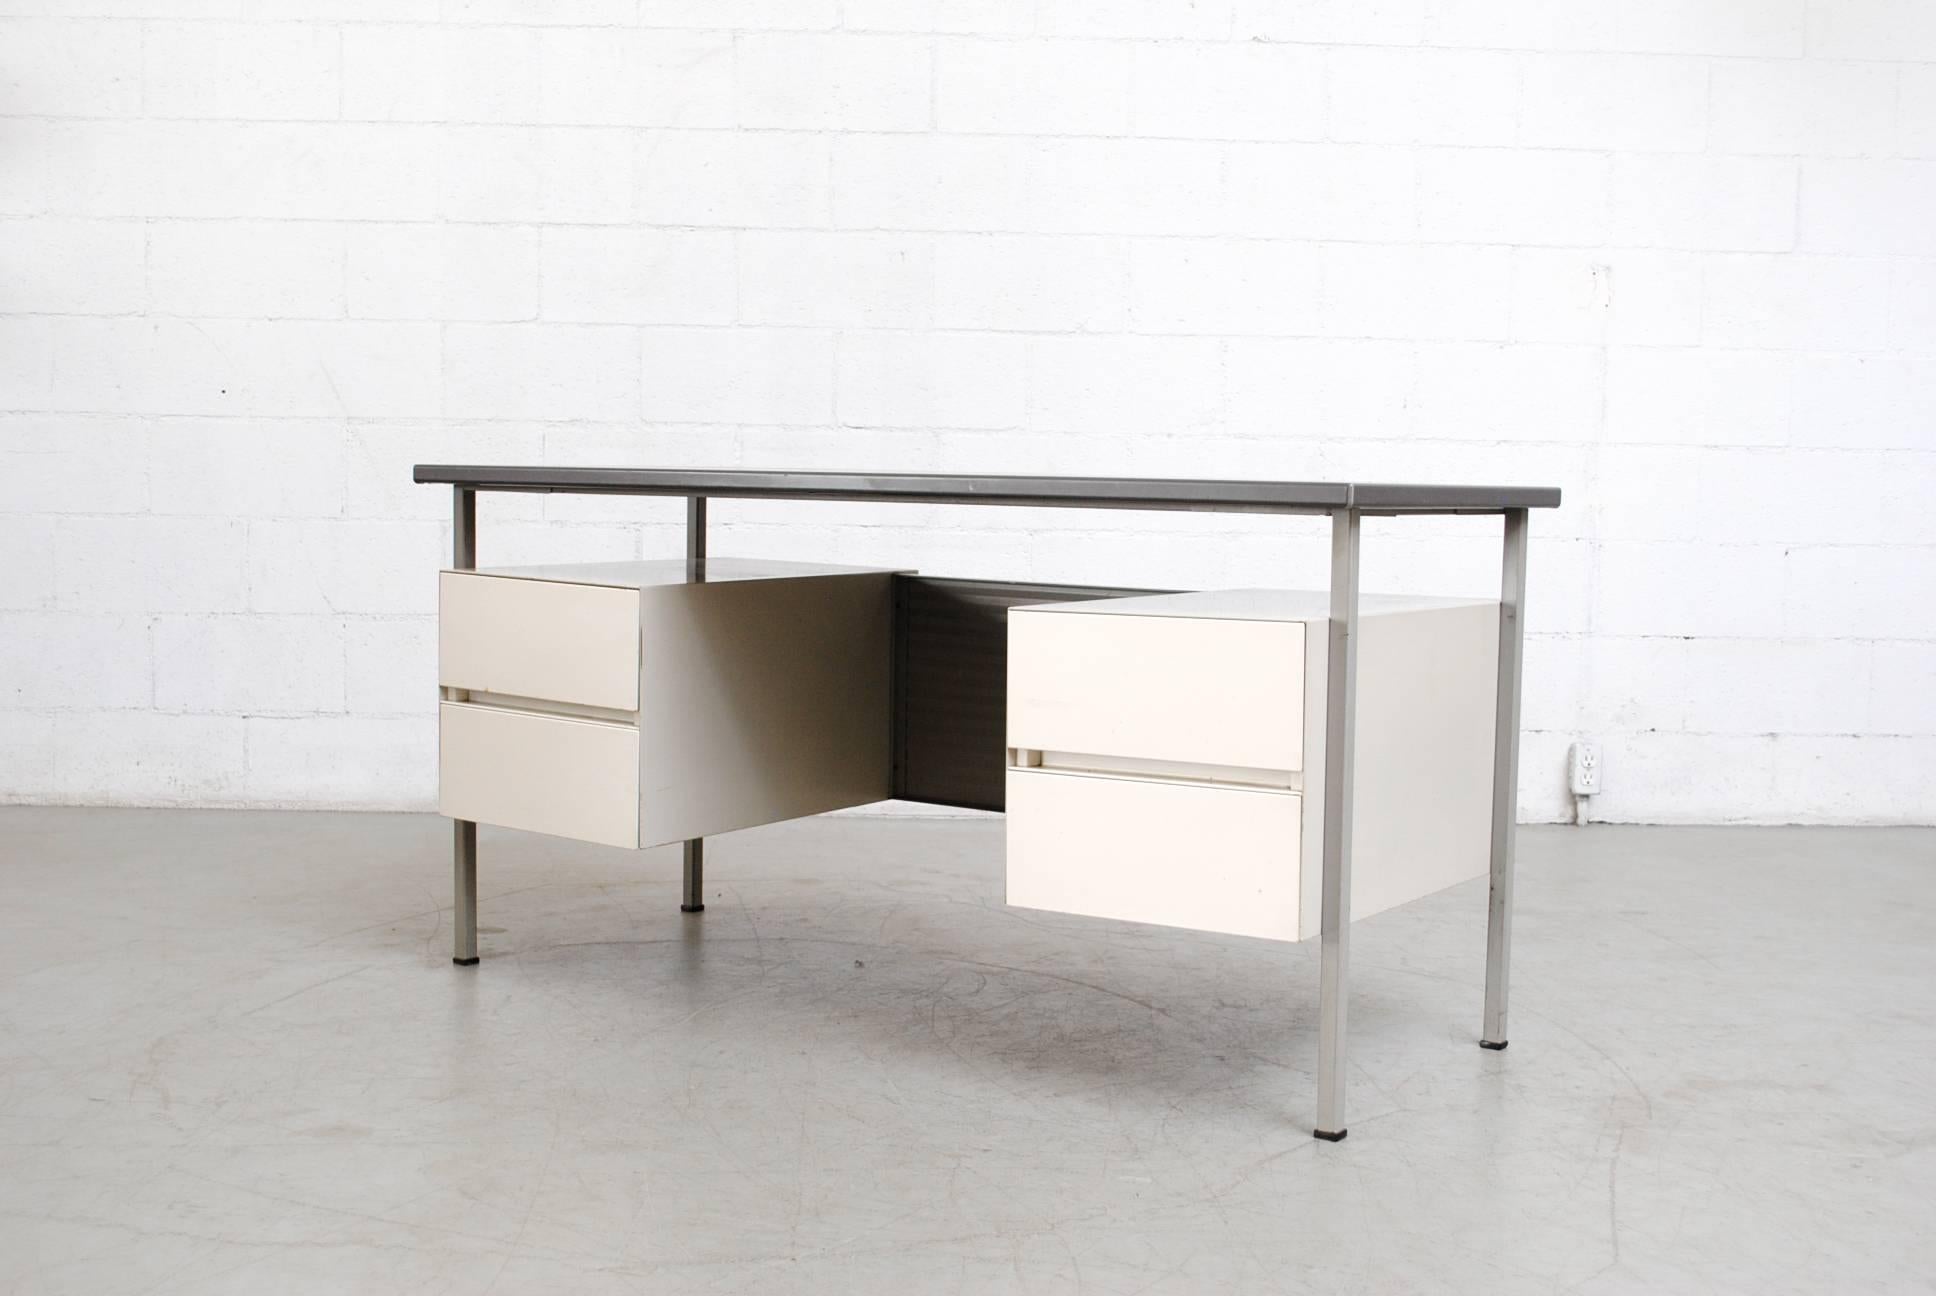 Floating grey vinyl topped Industrial desk with pale grey enameled metal frame and privacy screen with white enameled double drawers. Good original condition with visible wear consistent with its age and usage.